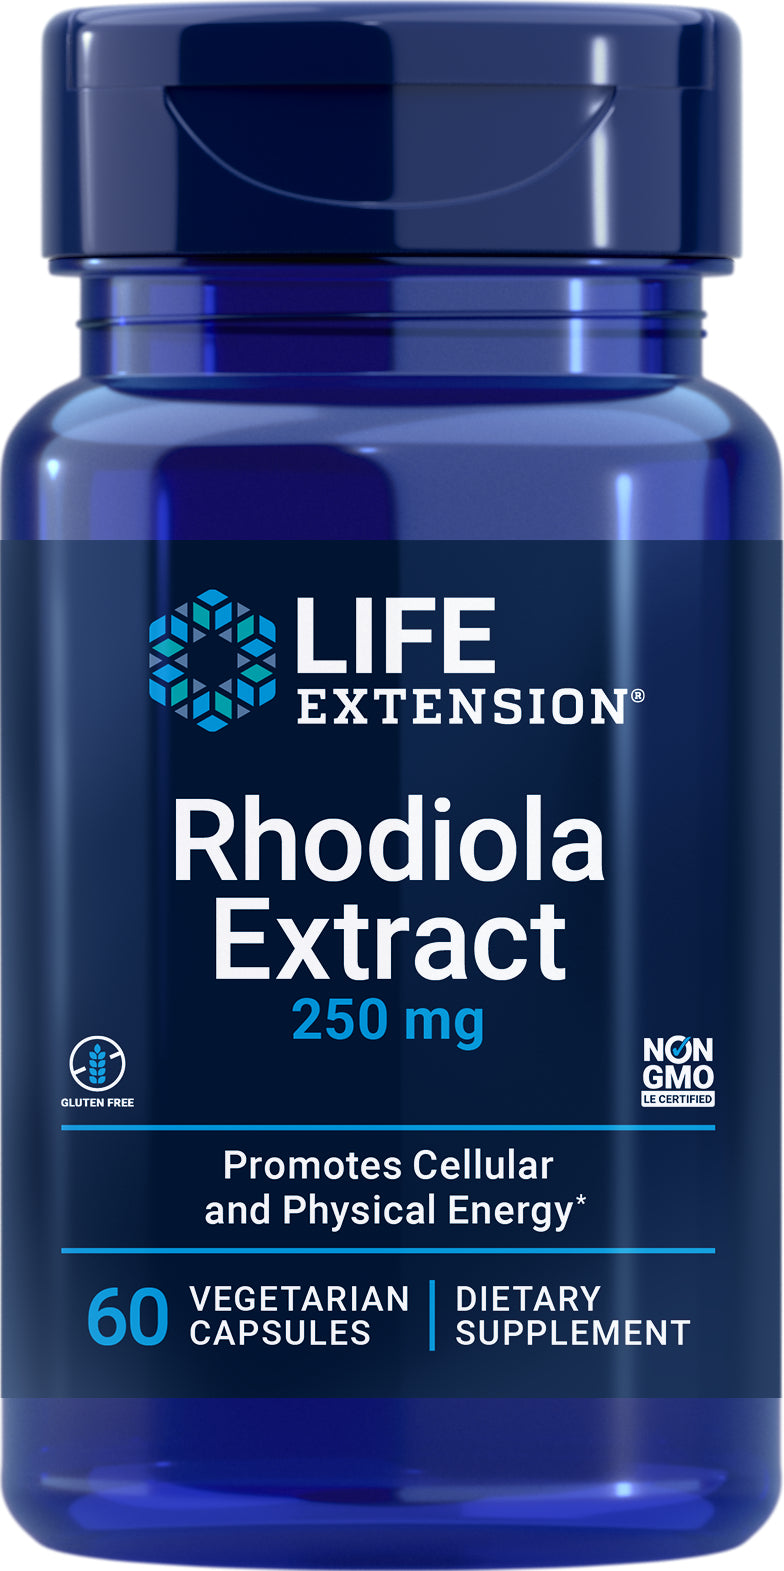 Rhodiola Extract 250 mg, 60 veg caps by Life Extension